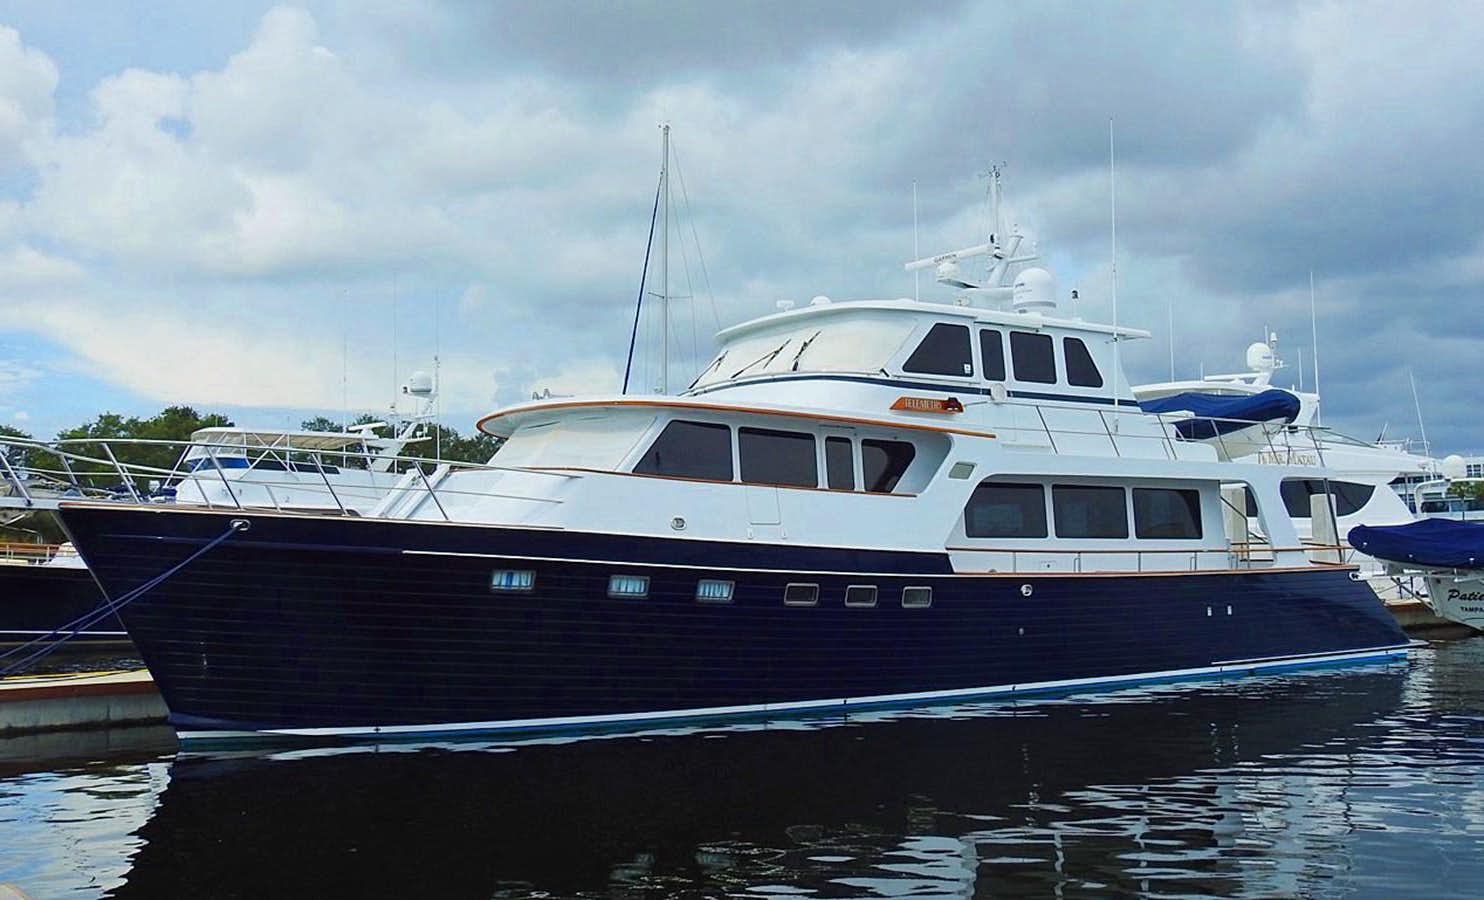 Telemetry
Yacht for Sale